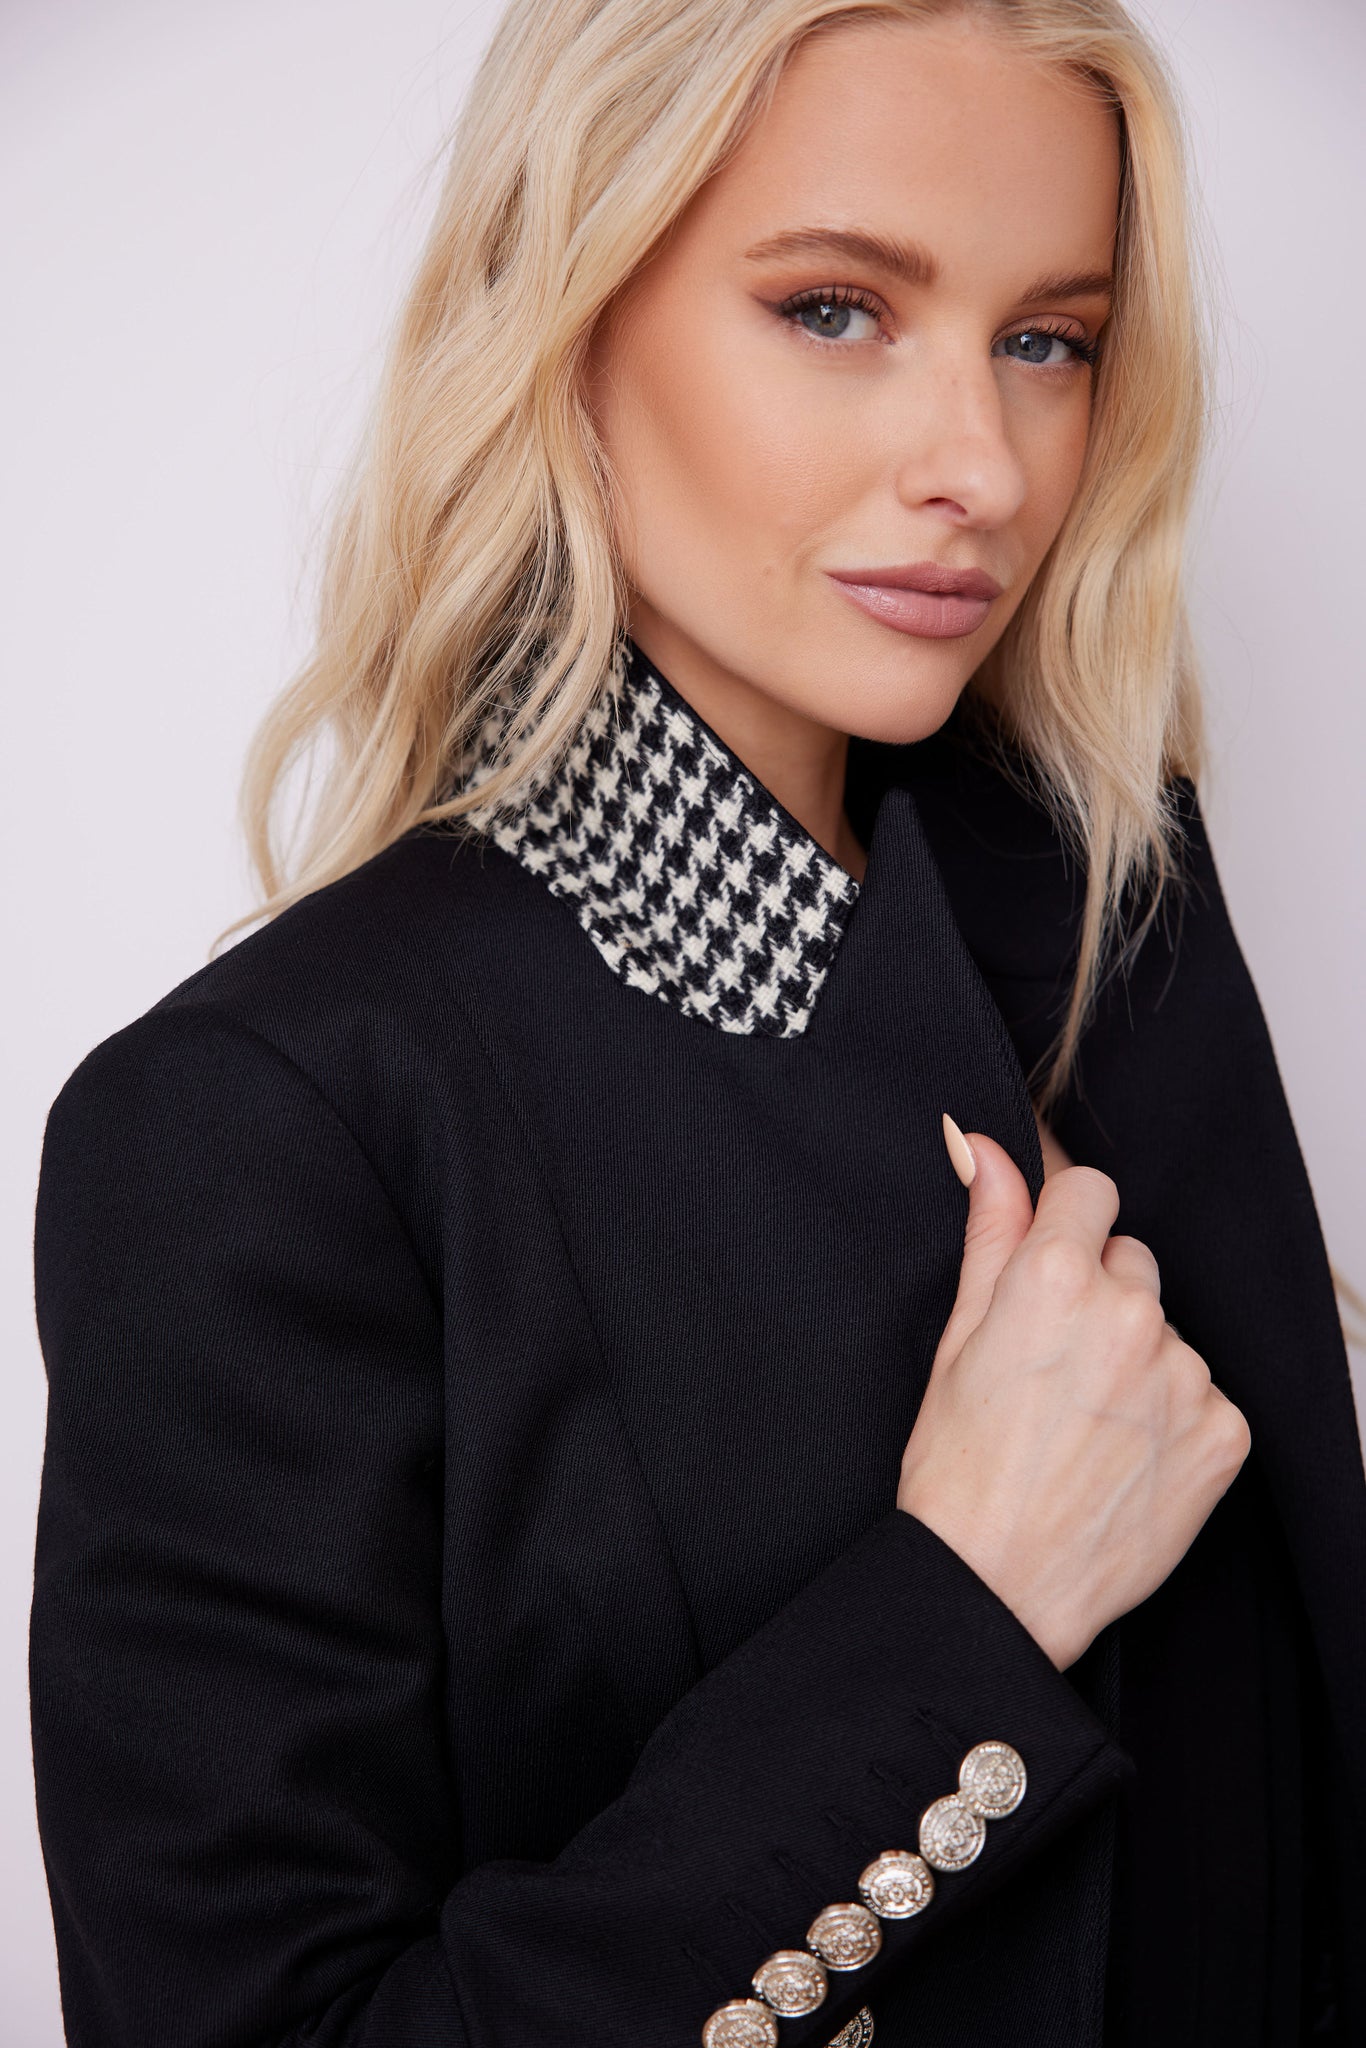 British made tailored cropped jacket in black with welt pockets and gold button detail down the front and on sleeves with black and white houndstooth undercollar